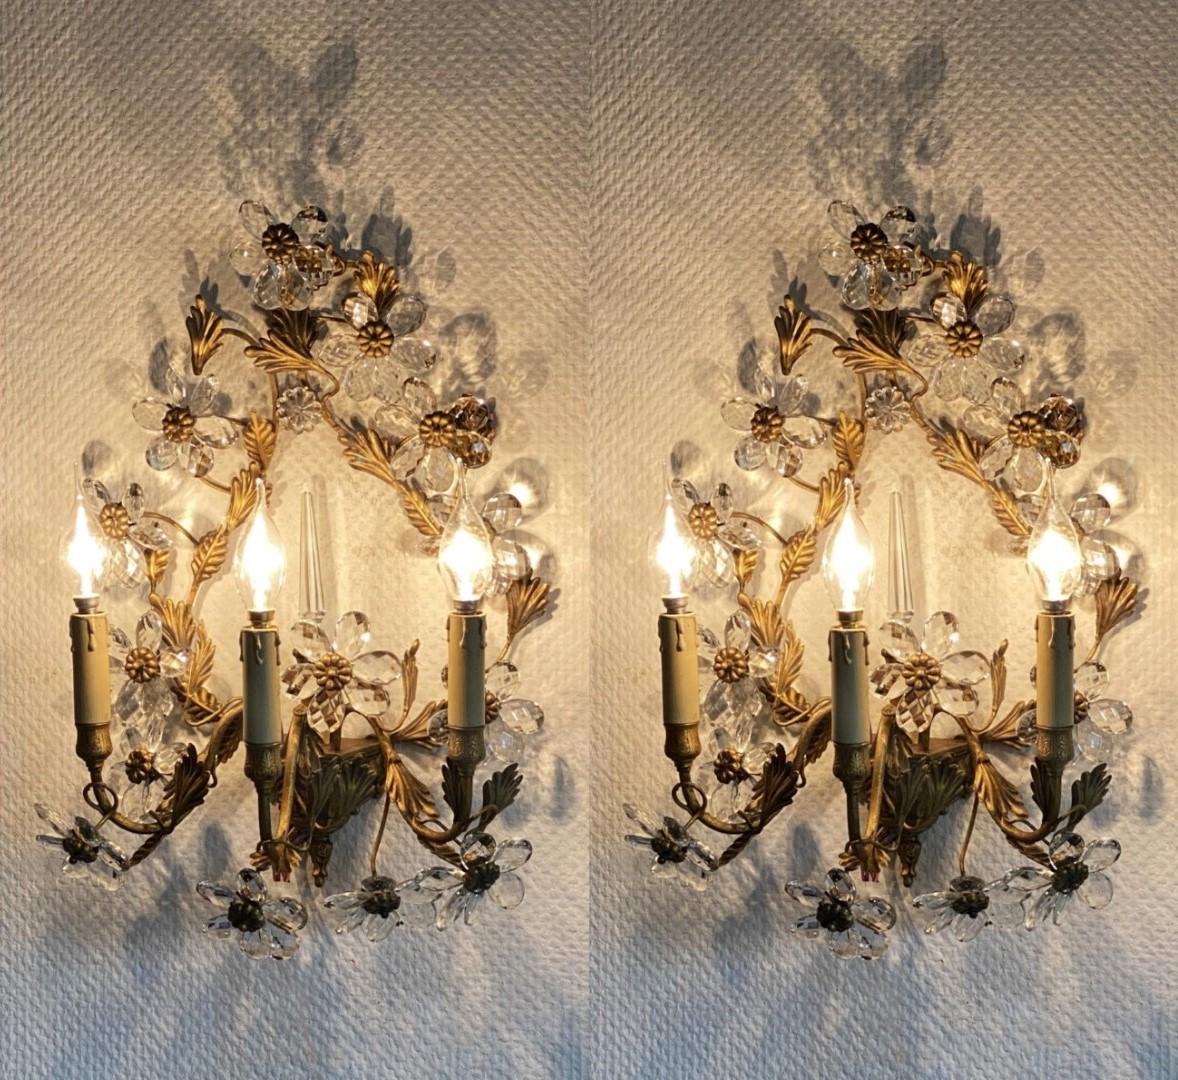 Pair of Large Maison Baguès Wrought Iron Crystal Flower Wall Sconces, 1930s For Sale 2